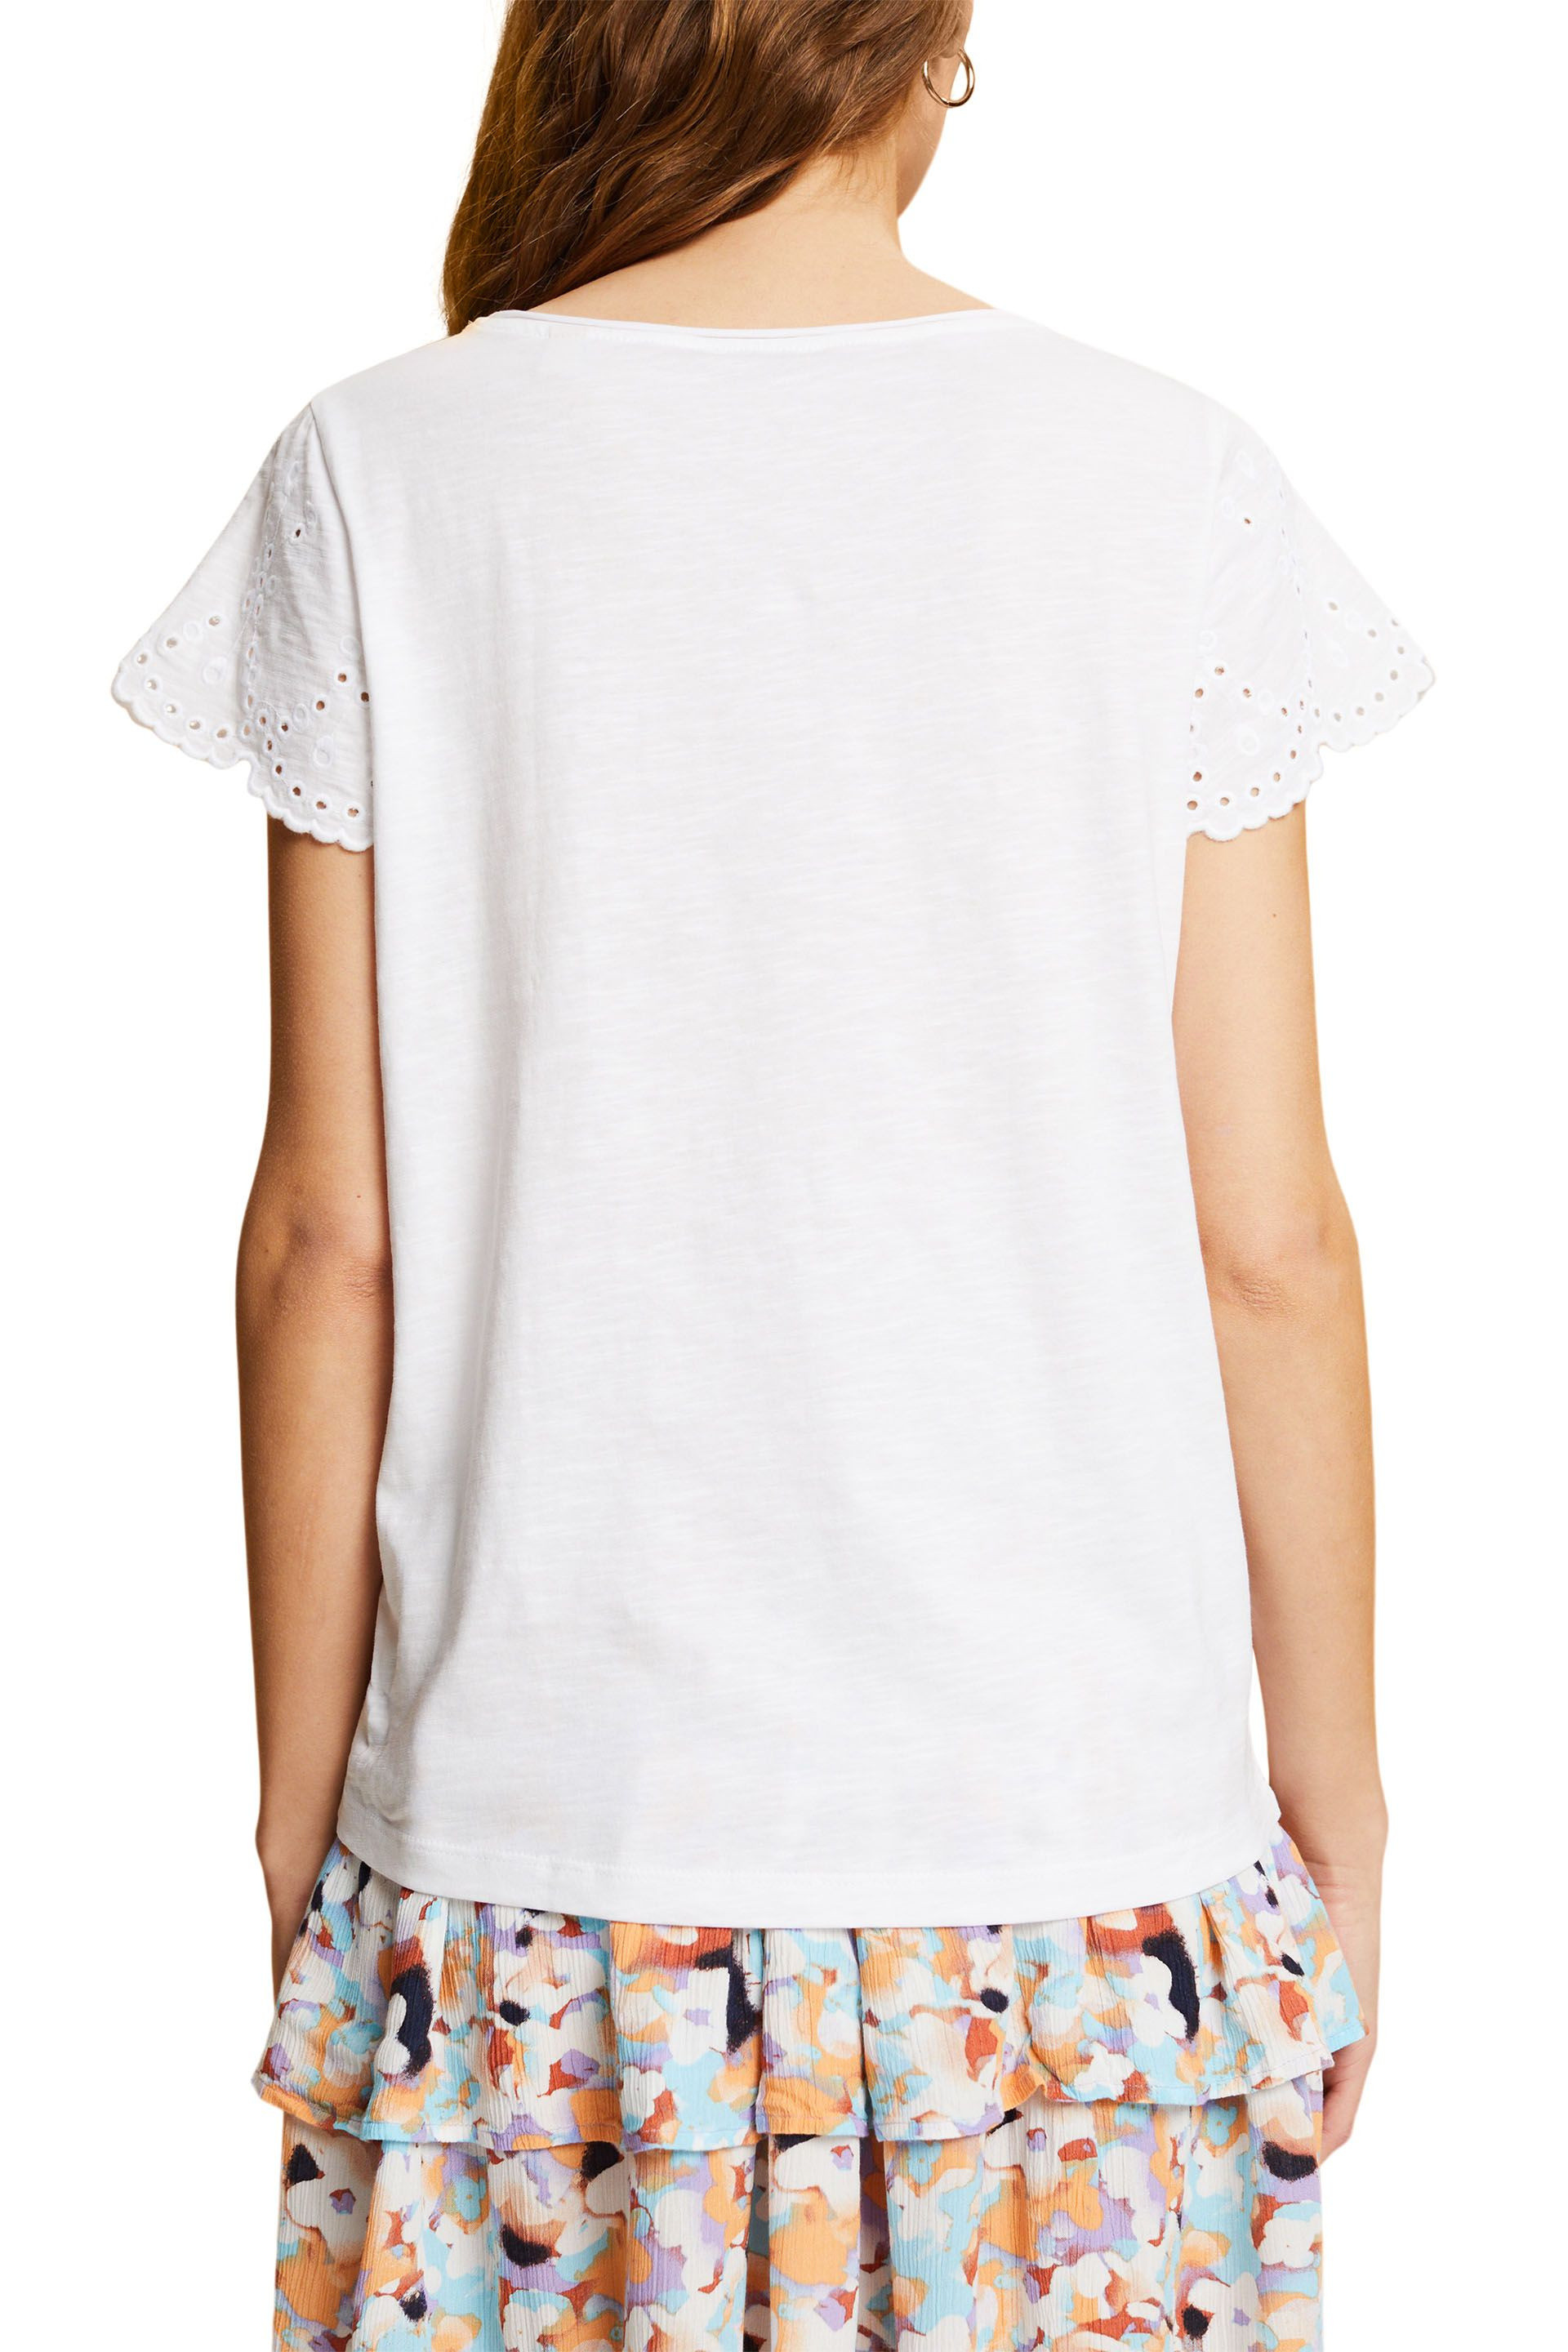 Esprit - Cotton T-shirt with embroidery, White, large image number 2